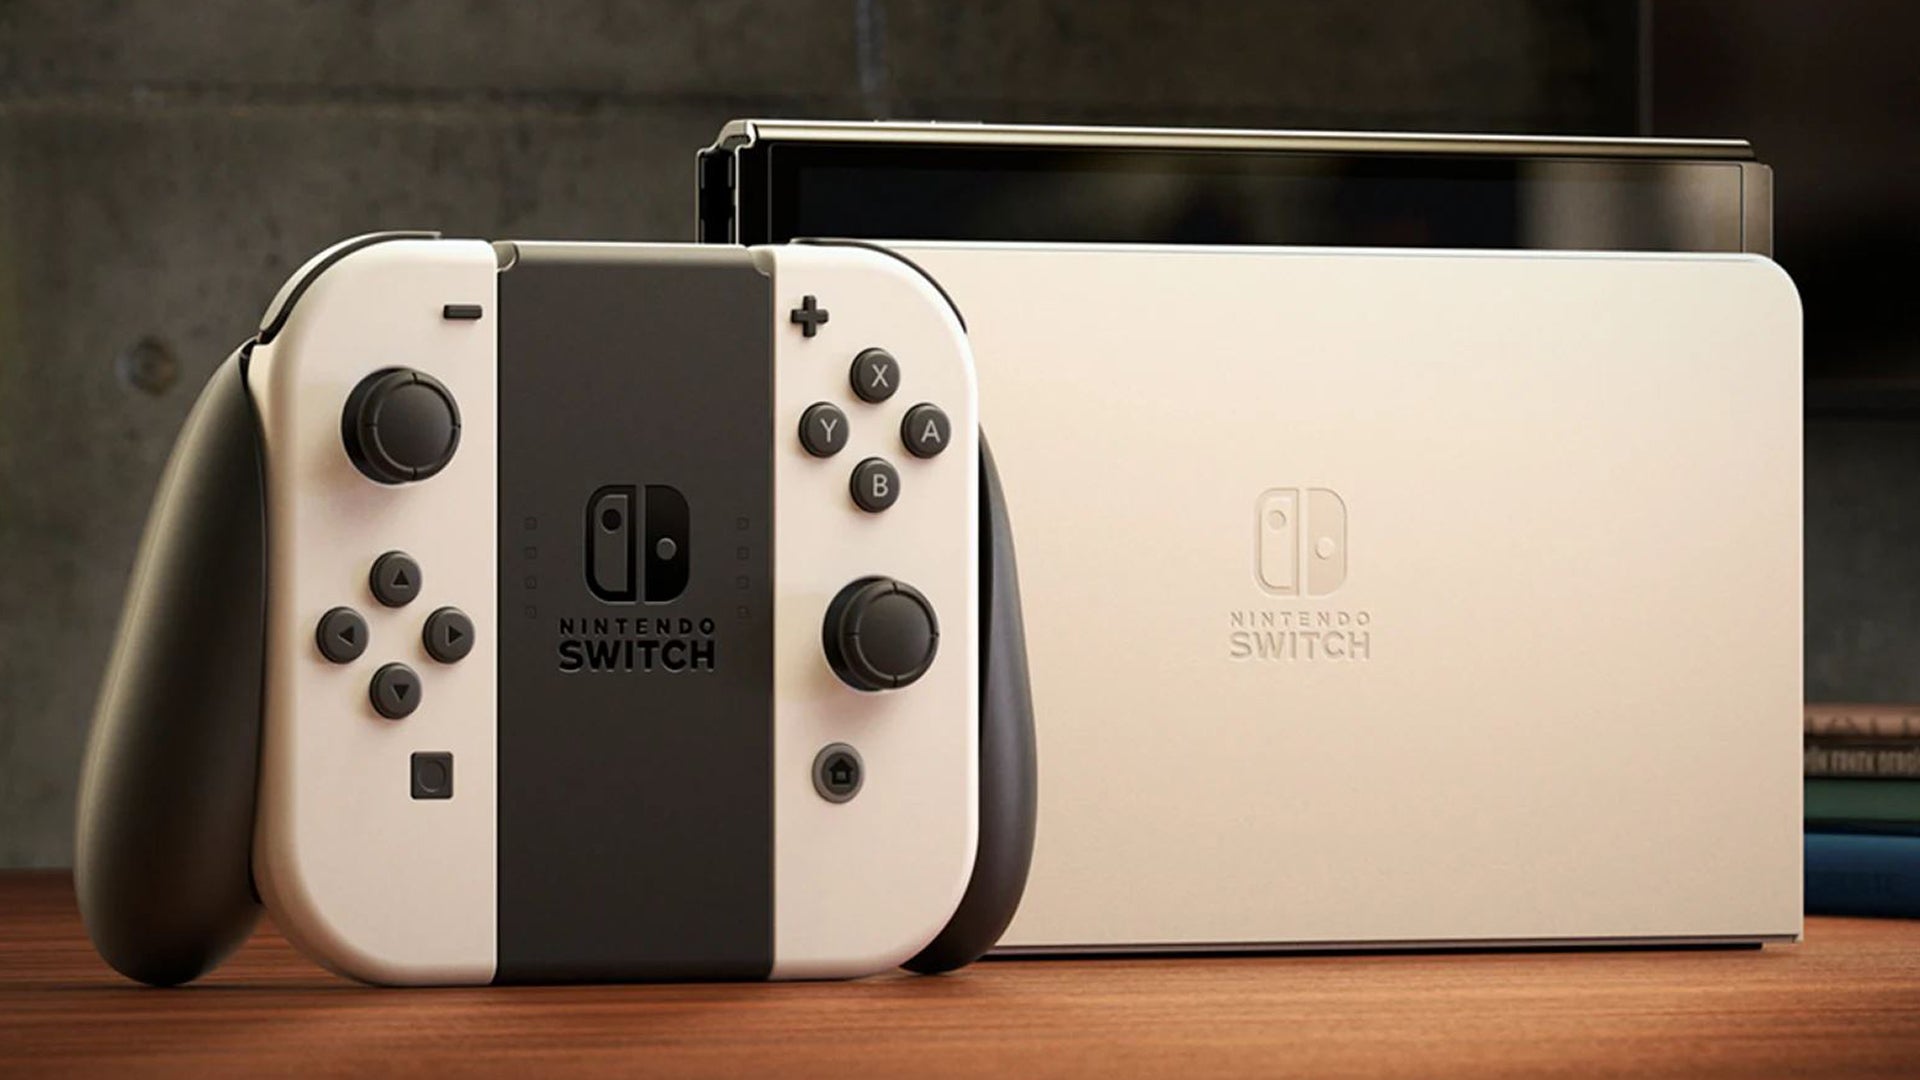 Nintendo Switch OLED Hands On: We Compared It To The Original